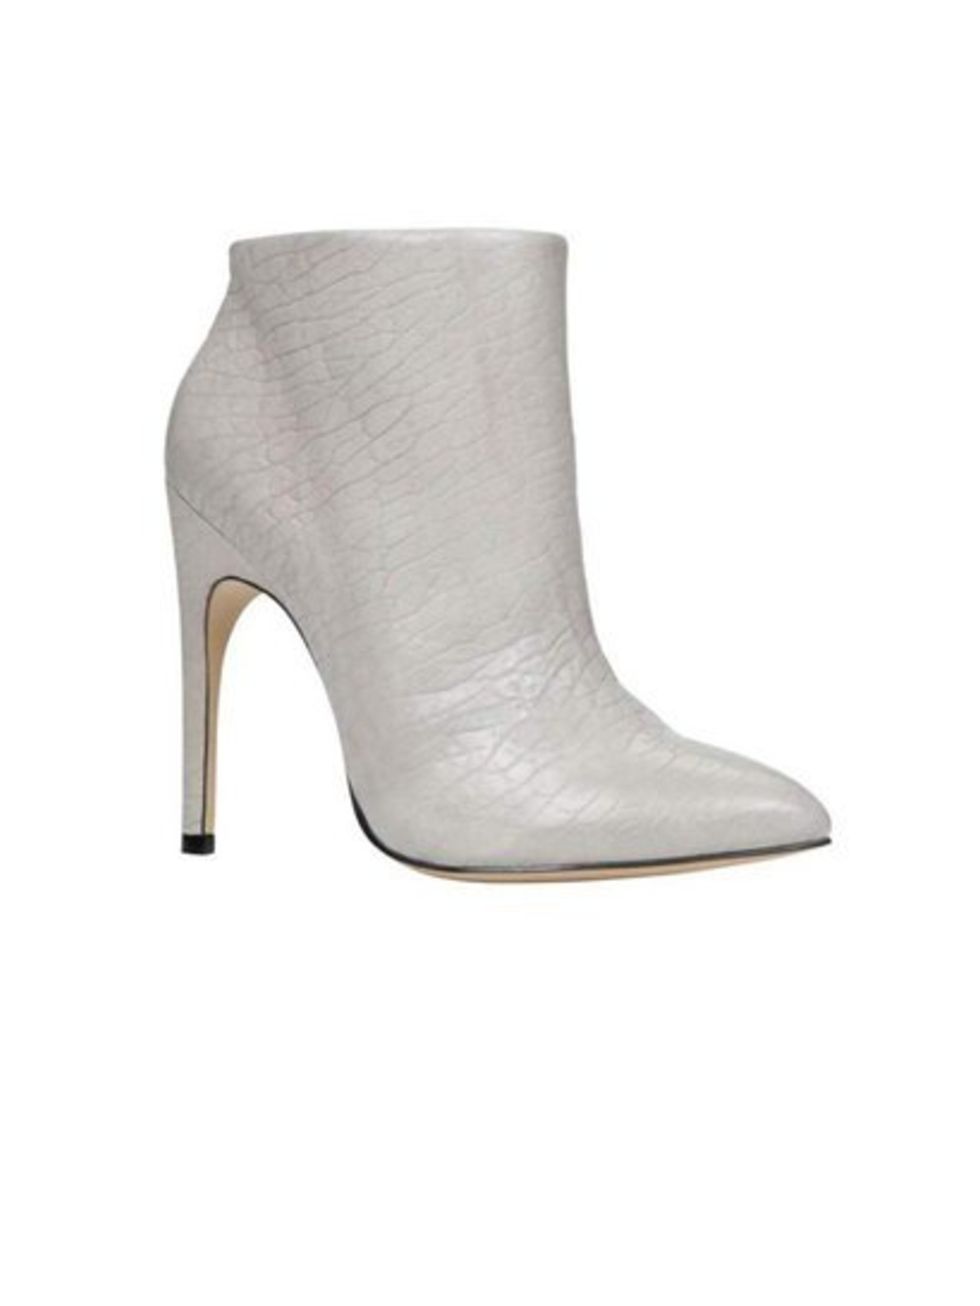 New neutral. Ankle boot, £110 from Aldo